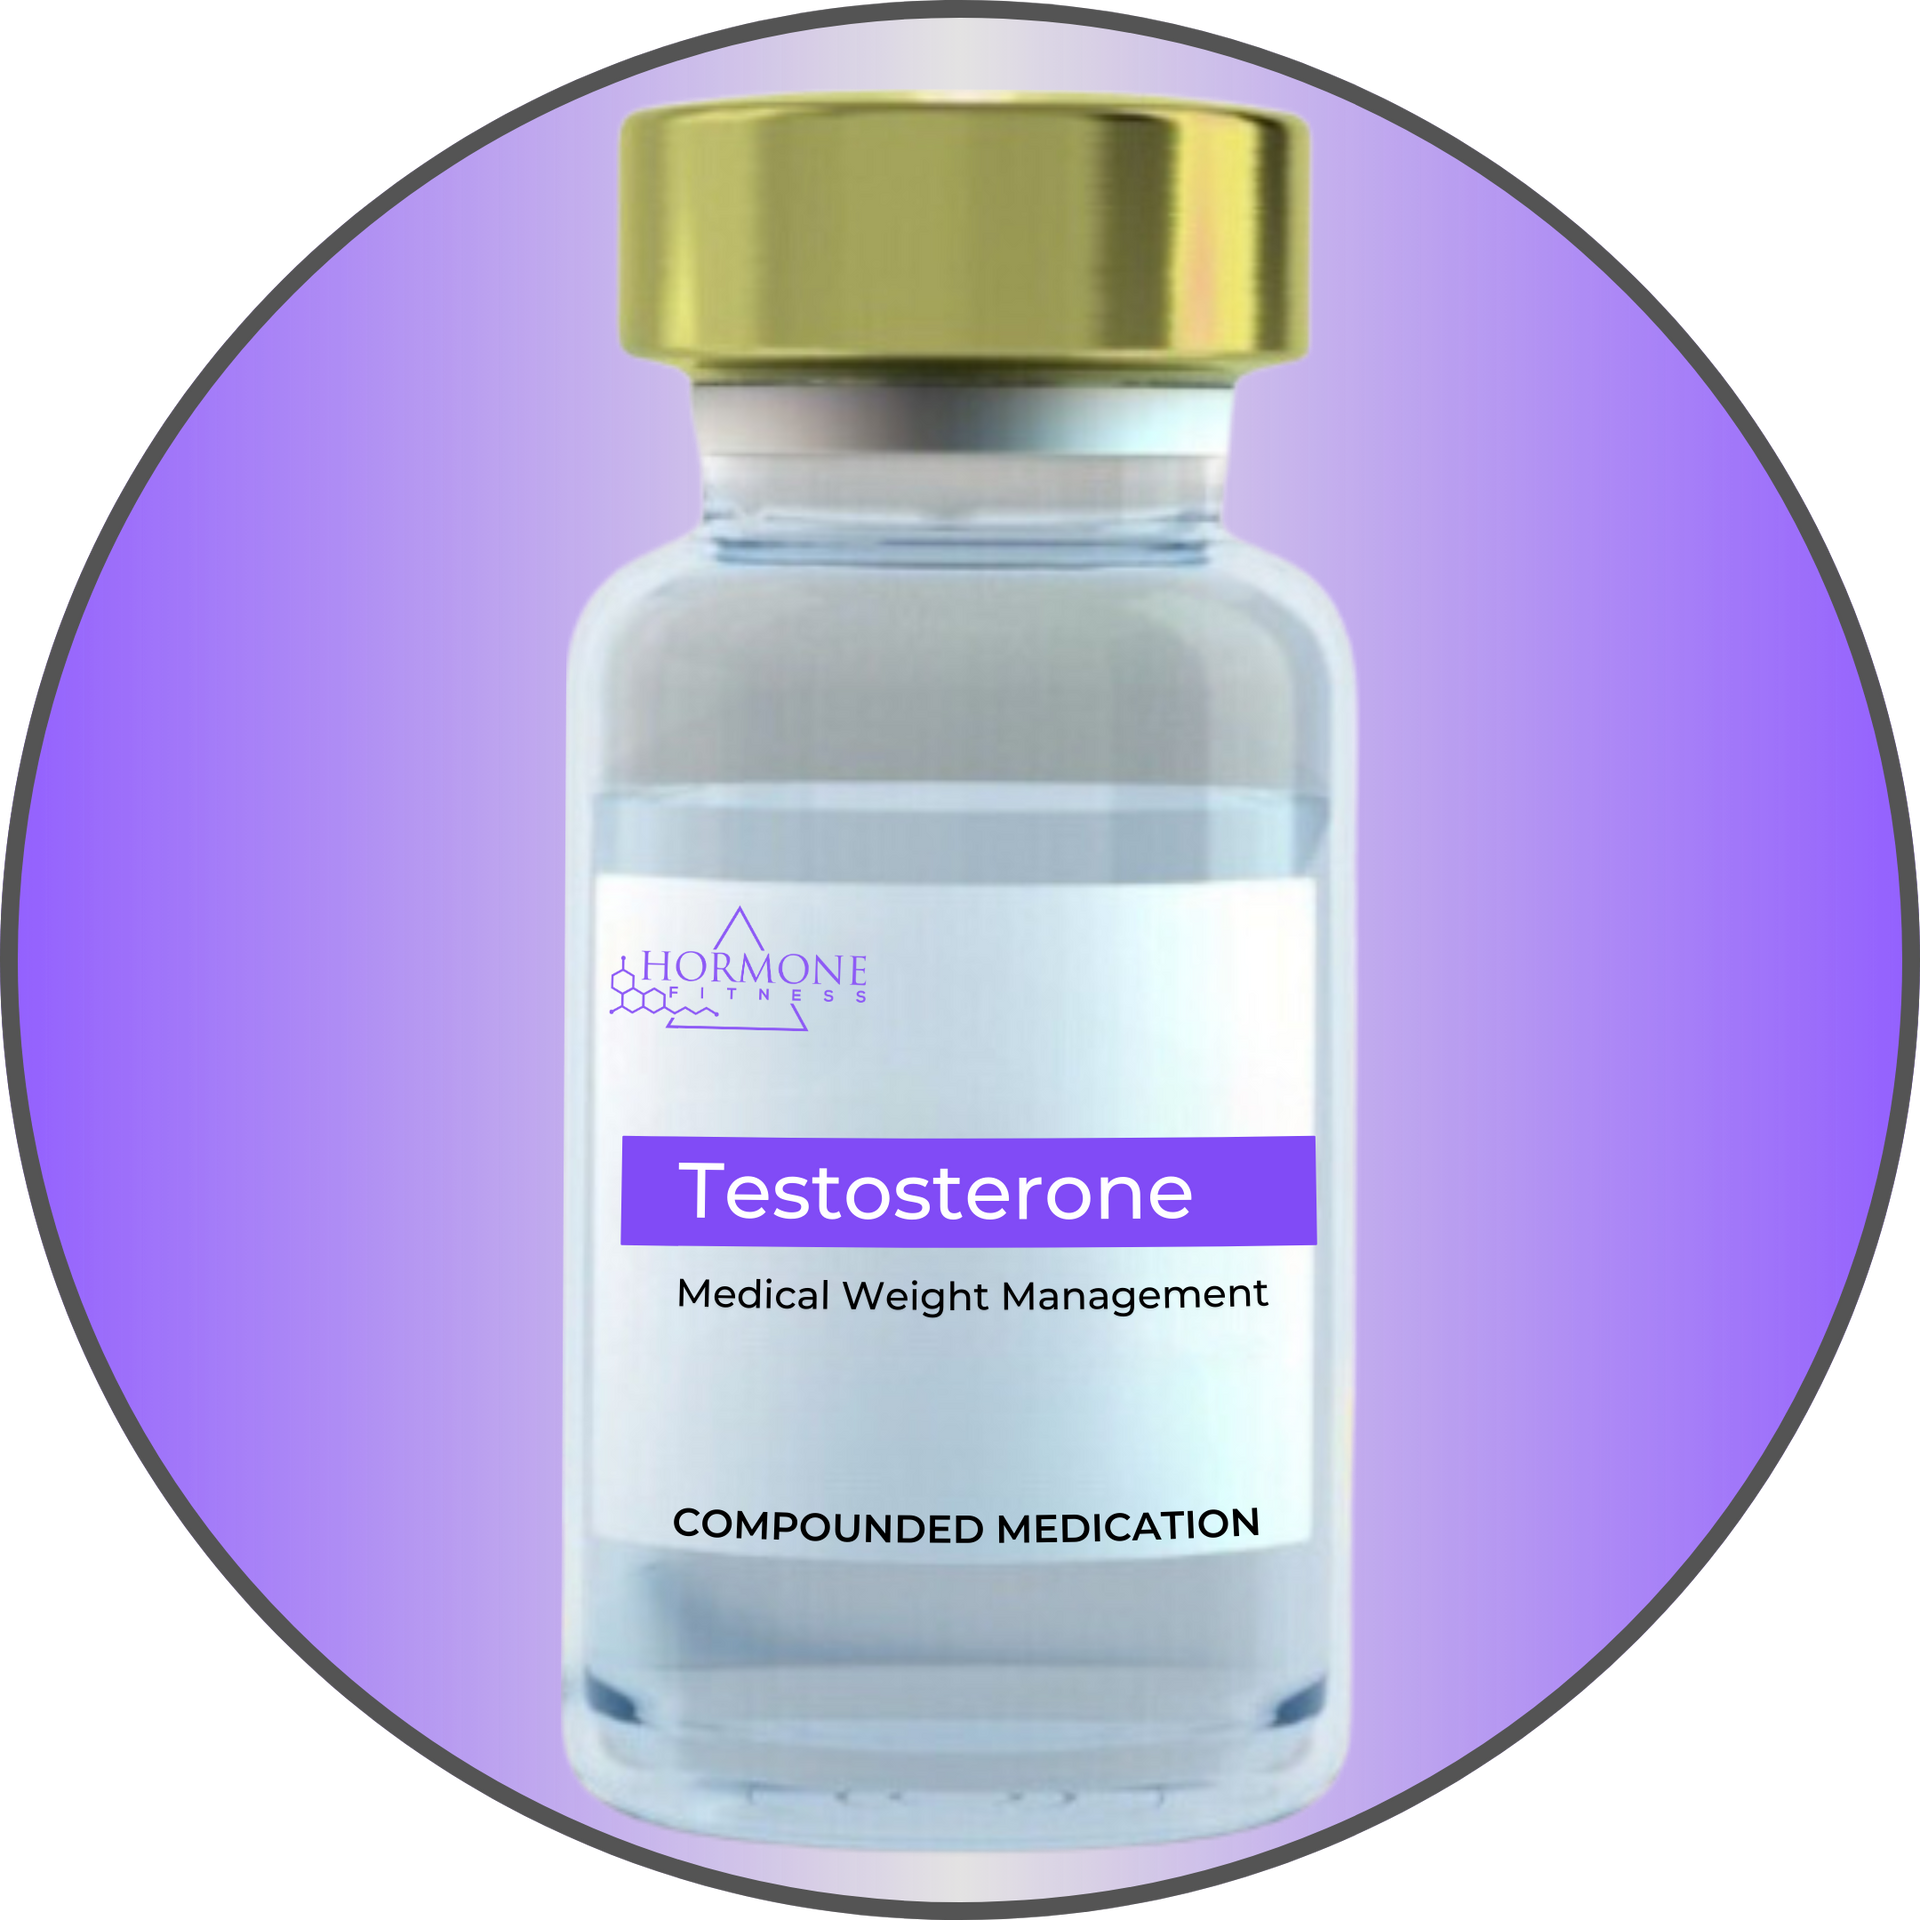 A vial of testosterone compounded weight loss medication on a purple background